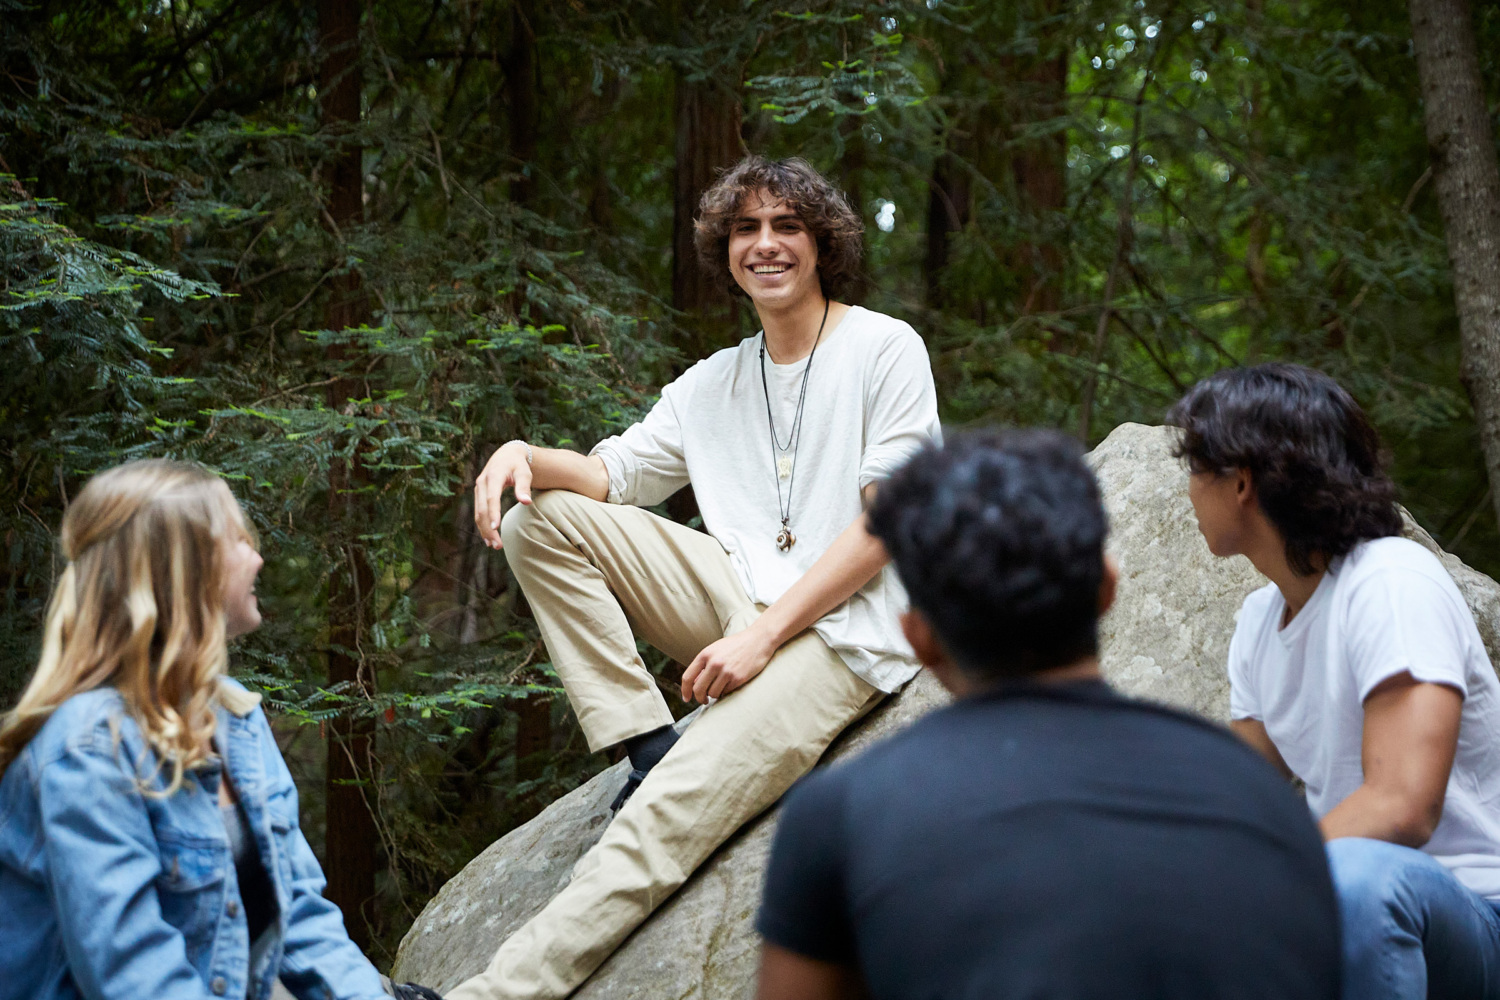 Julian Berkowitz-Sklar sits on a large rock smiling with other students sitting around him.